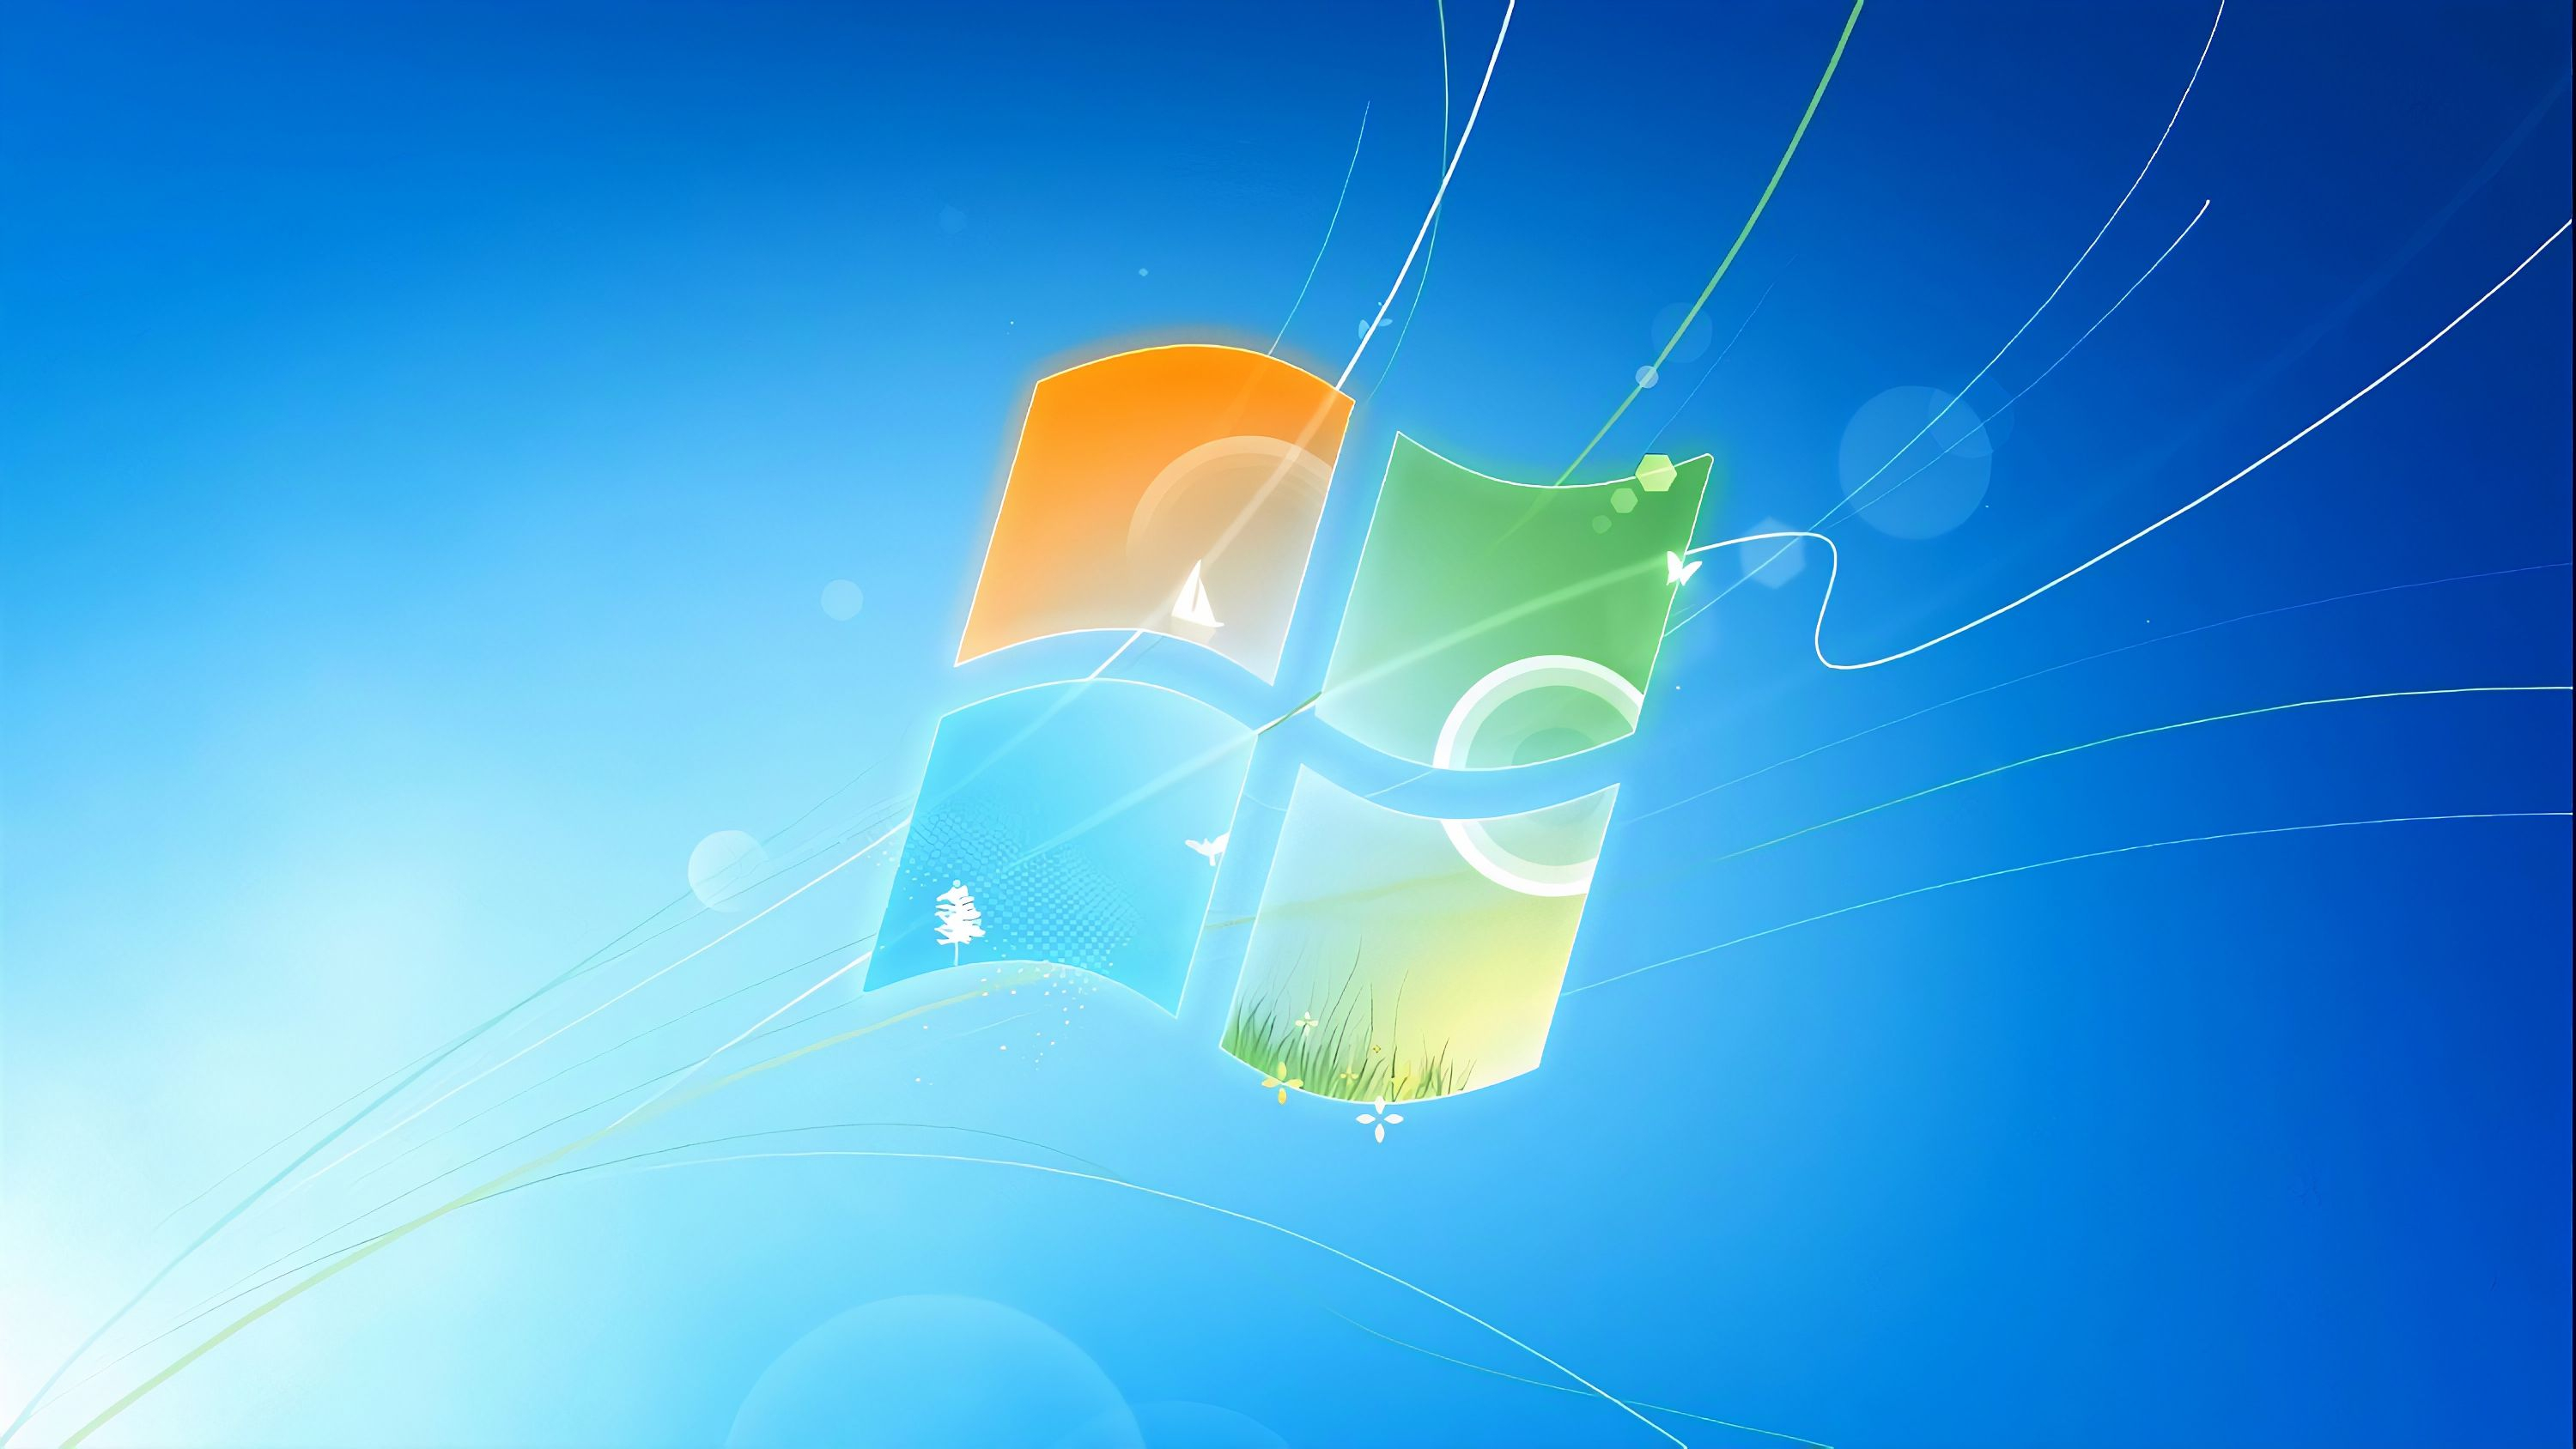 Windows wallpapers and backgrounds k hd dual screen